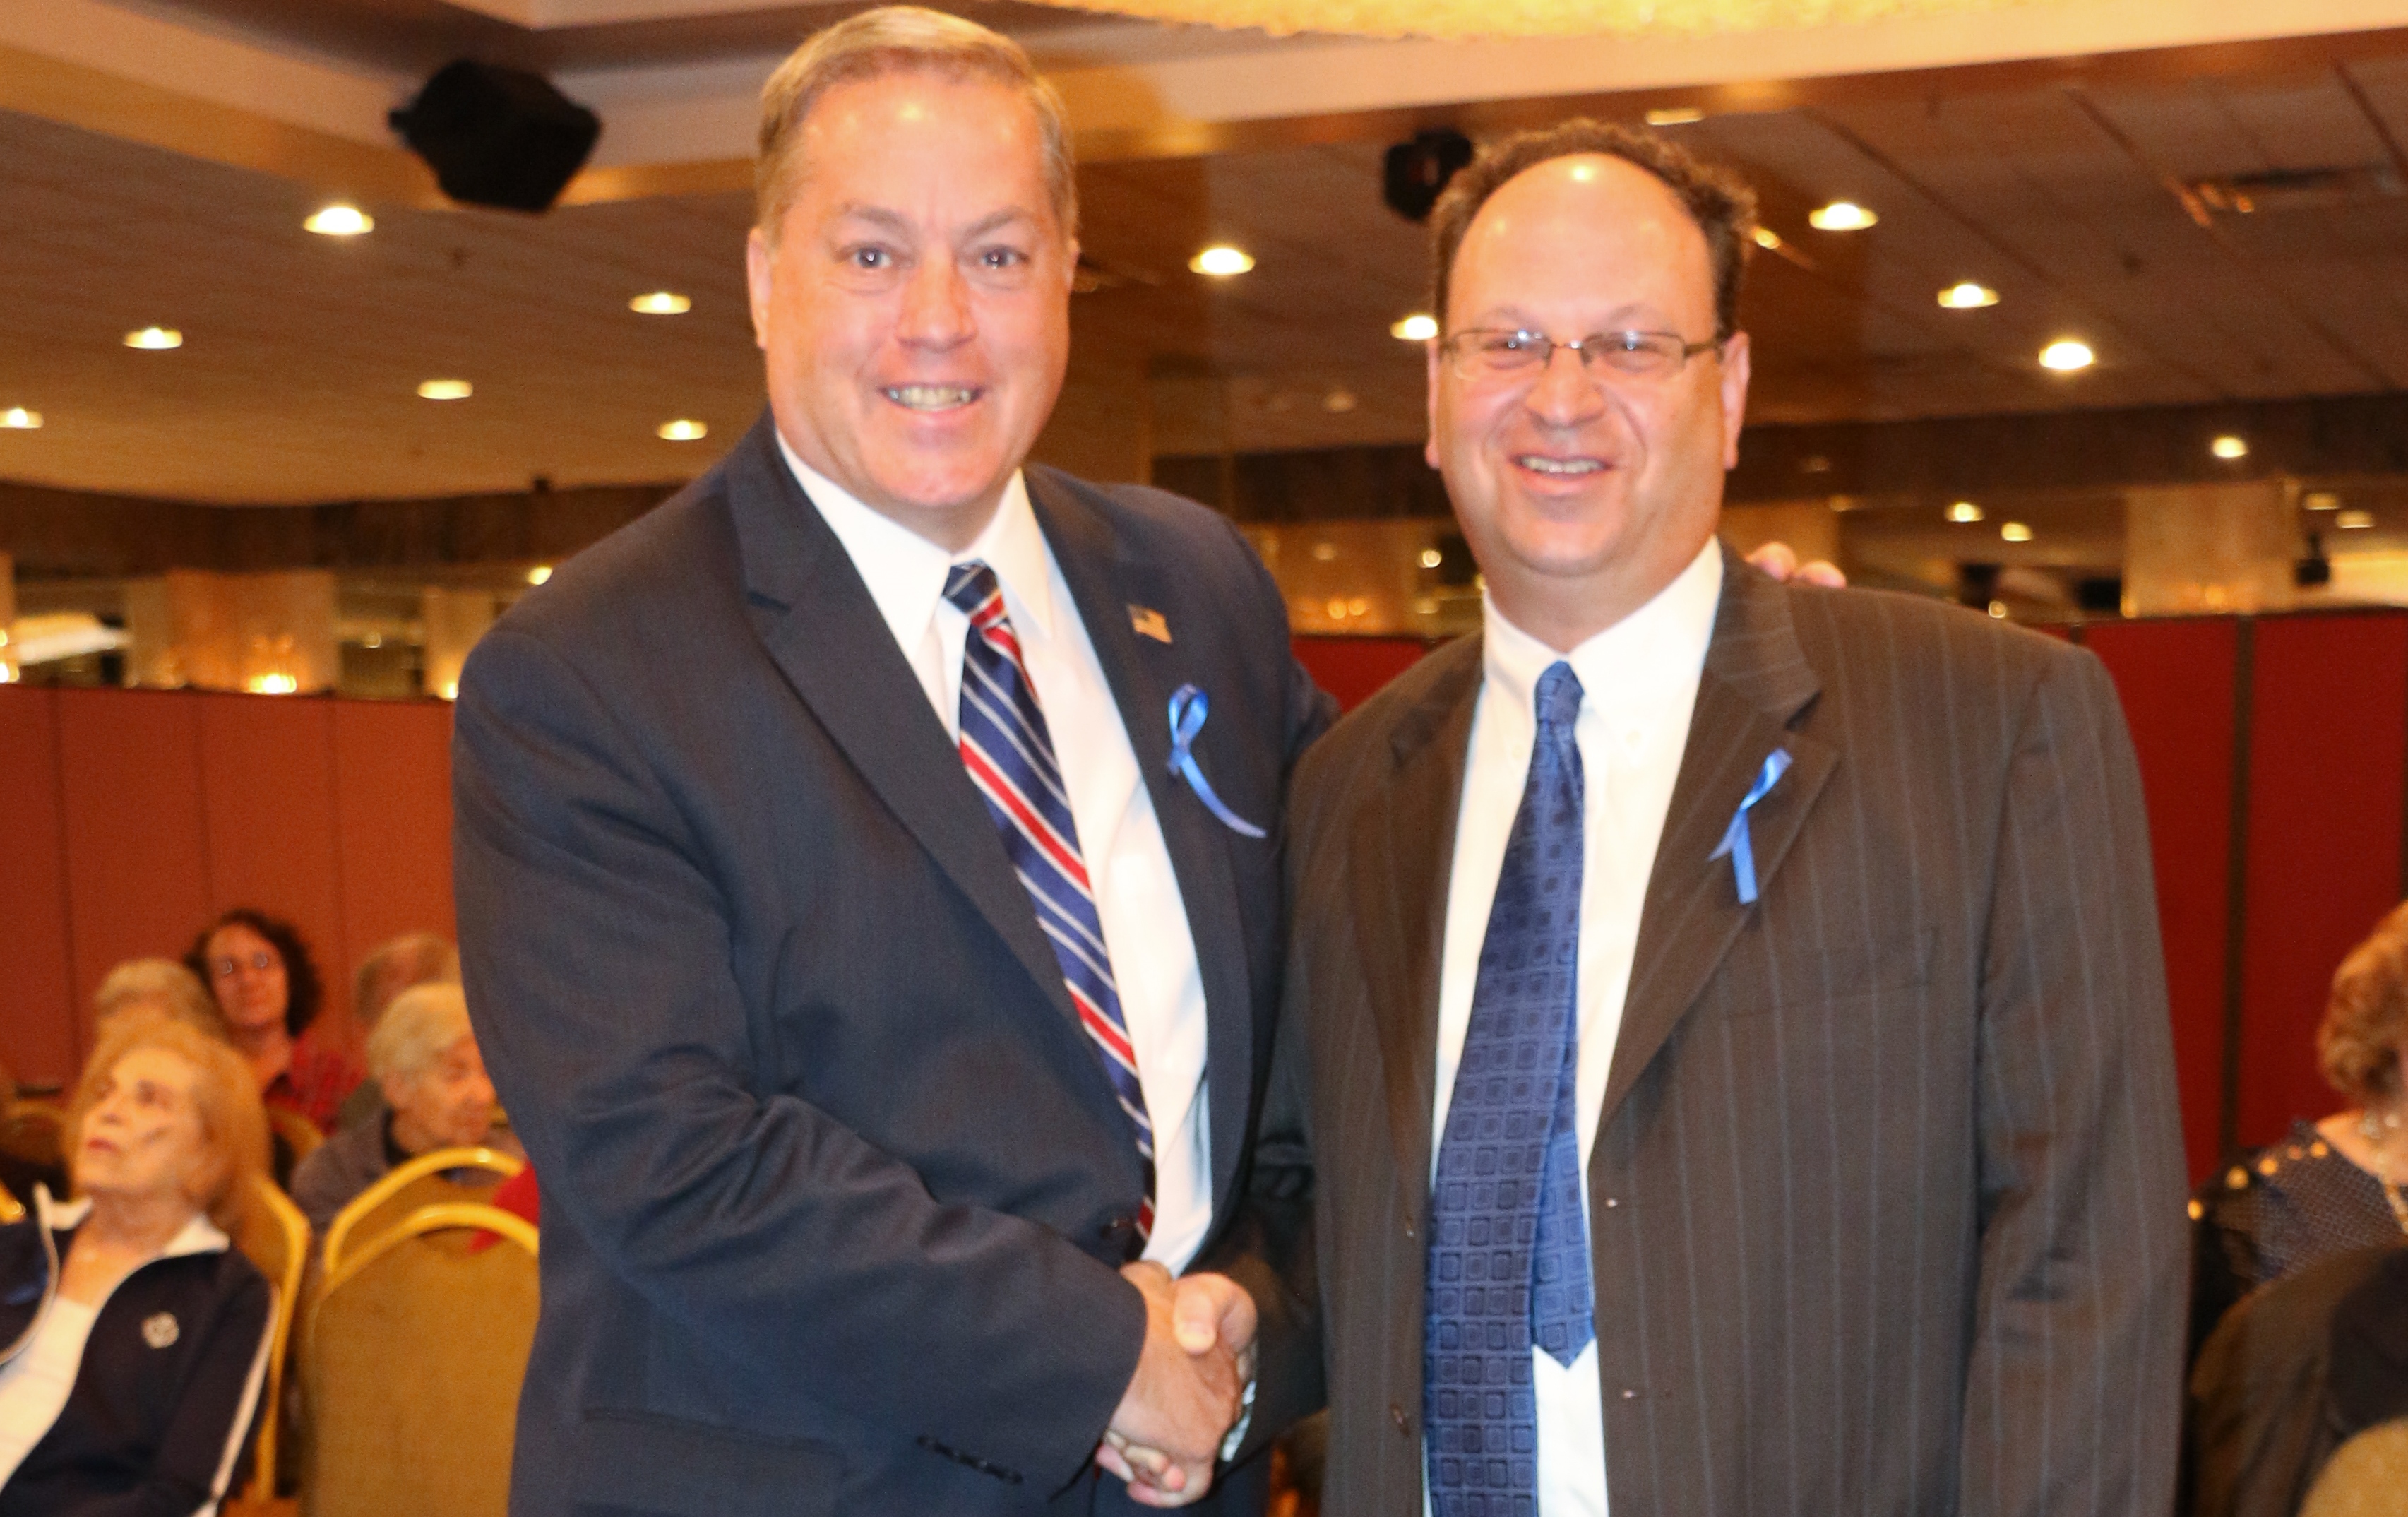 Democrat Barry Grodenchik (right) and Republican Joe Concannon (left) are seeking the open 23rd Council District seat.